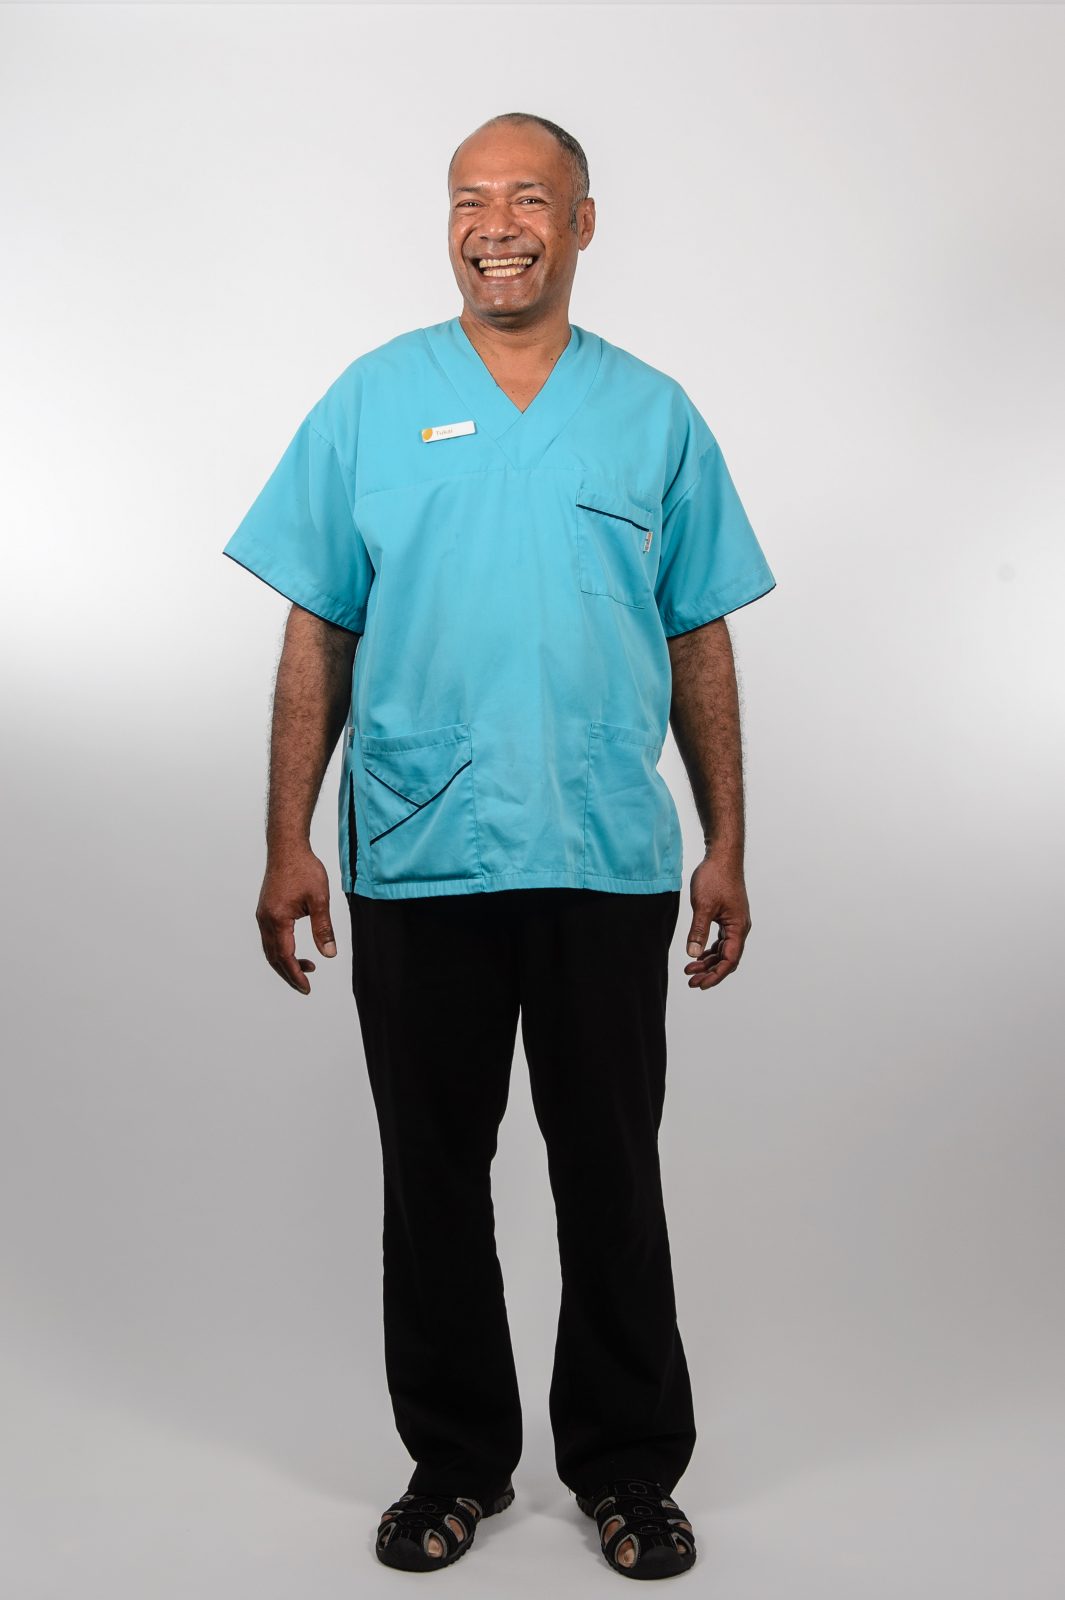 Male aged care worker smiling